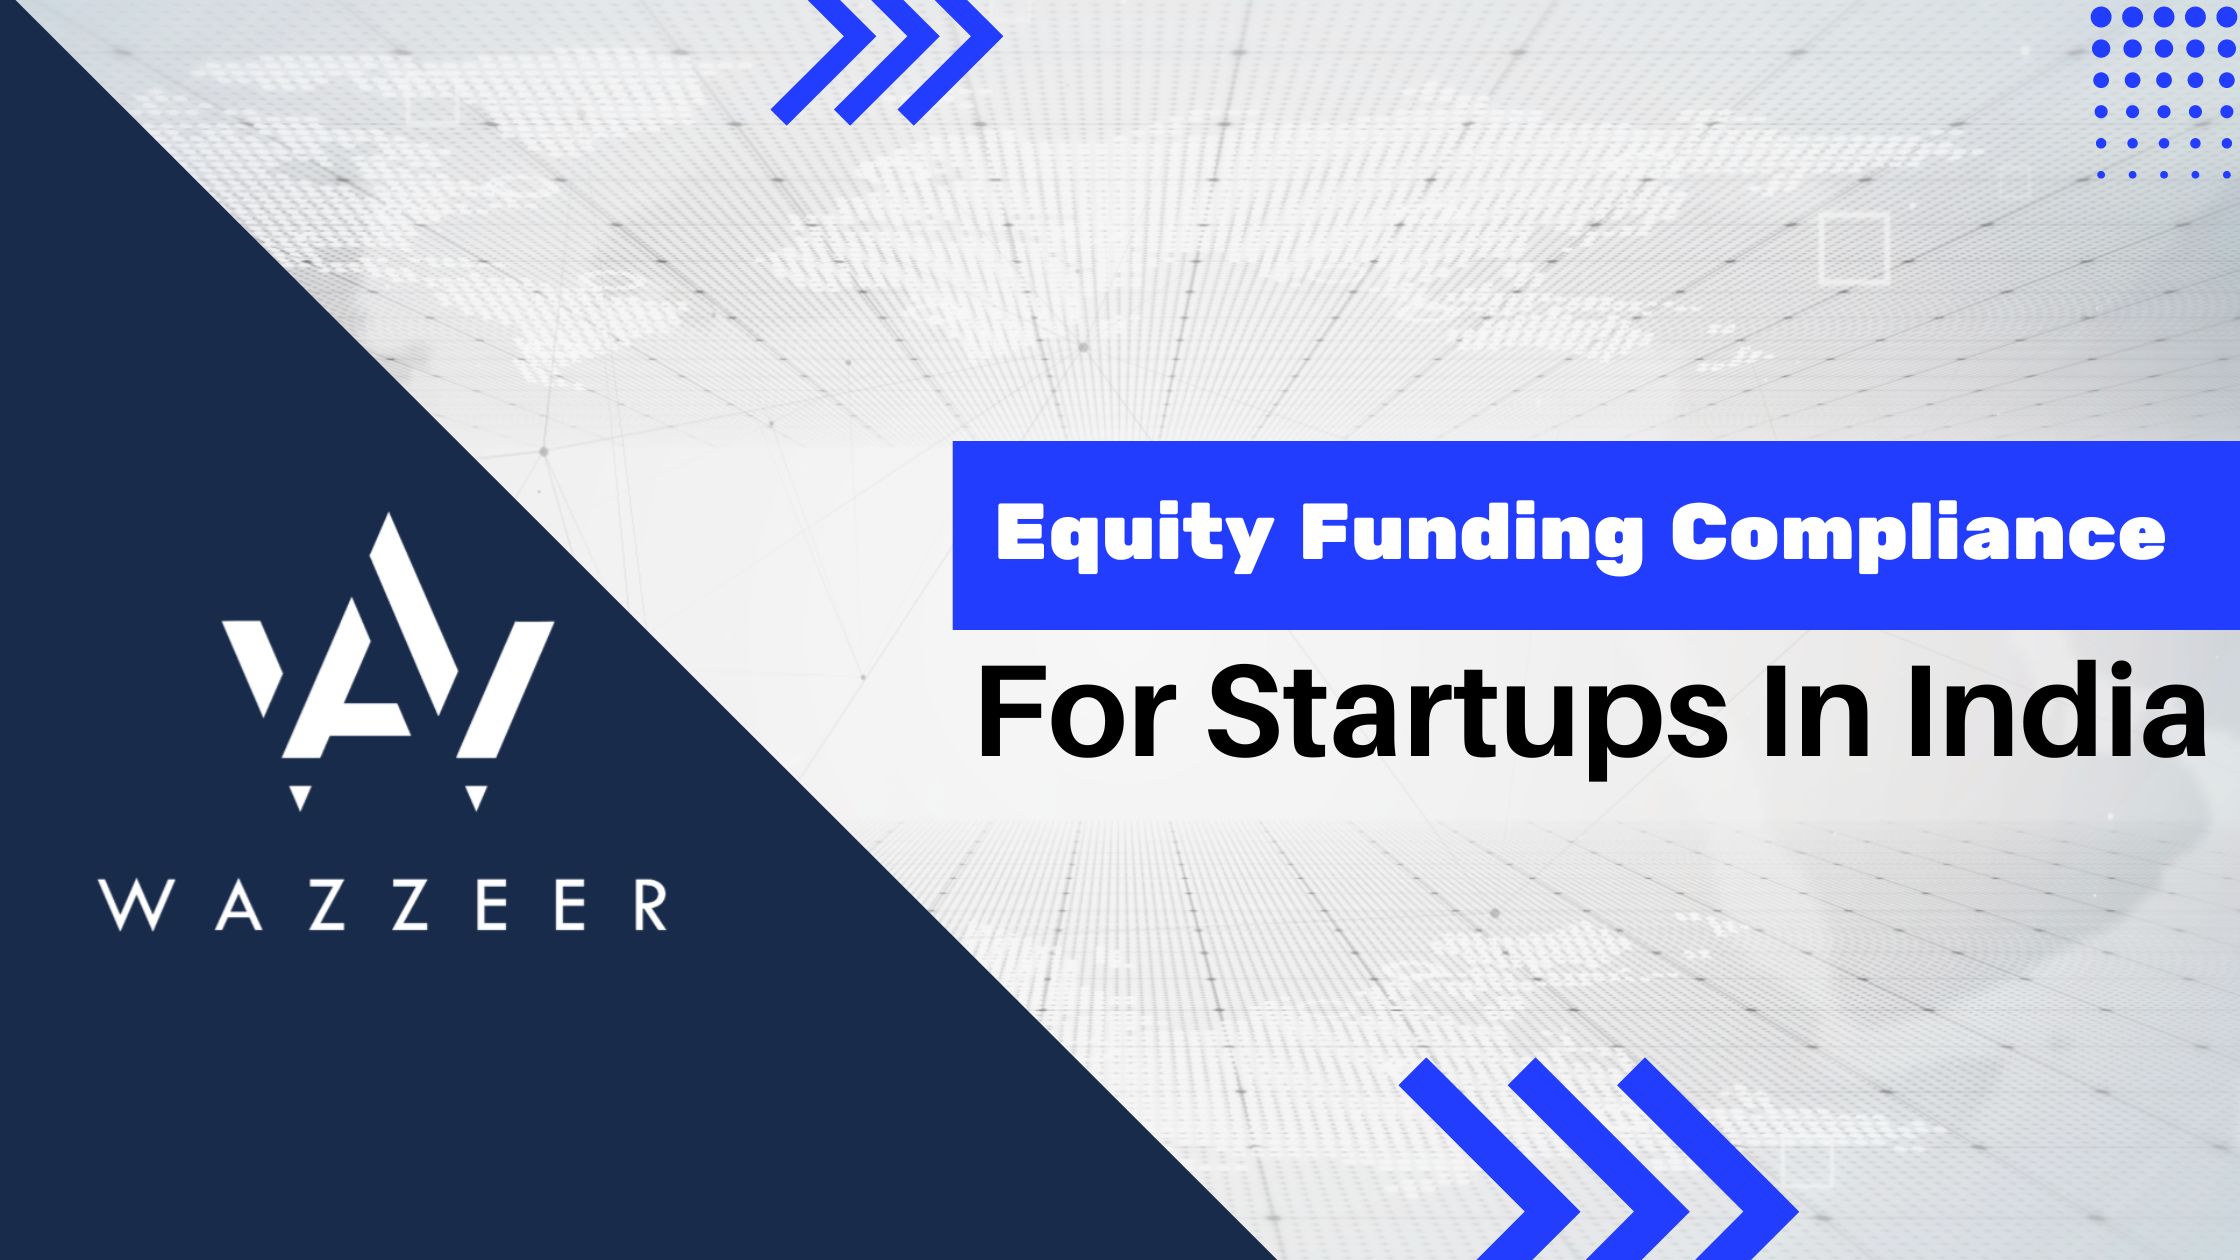 Equity Funding Compliance For Startups In India